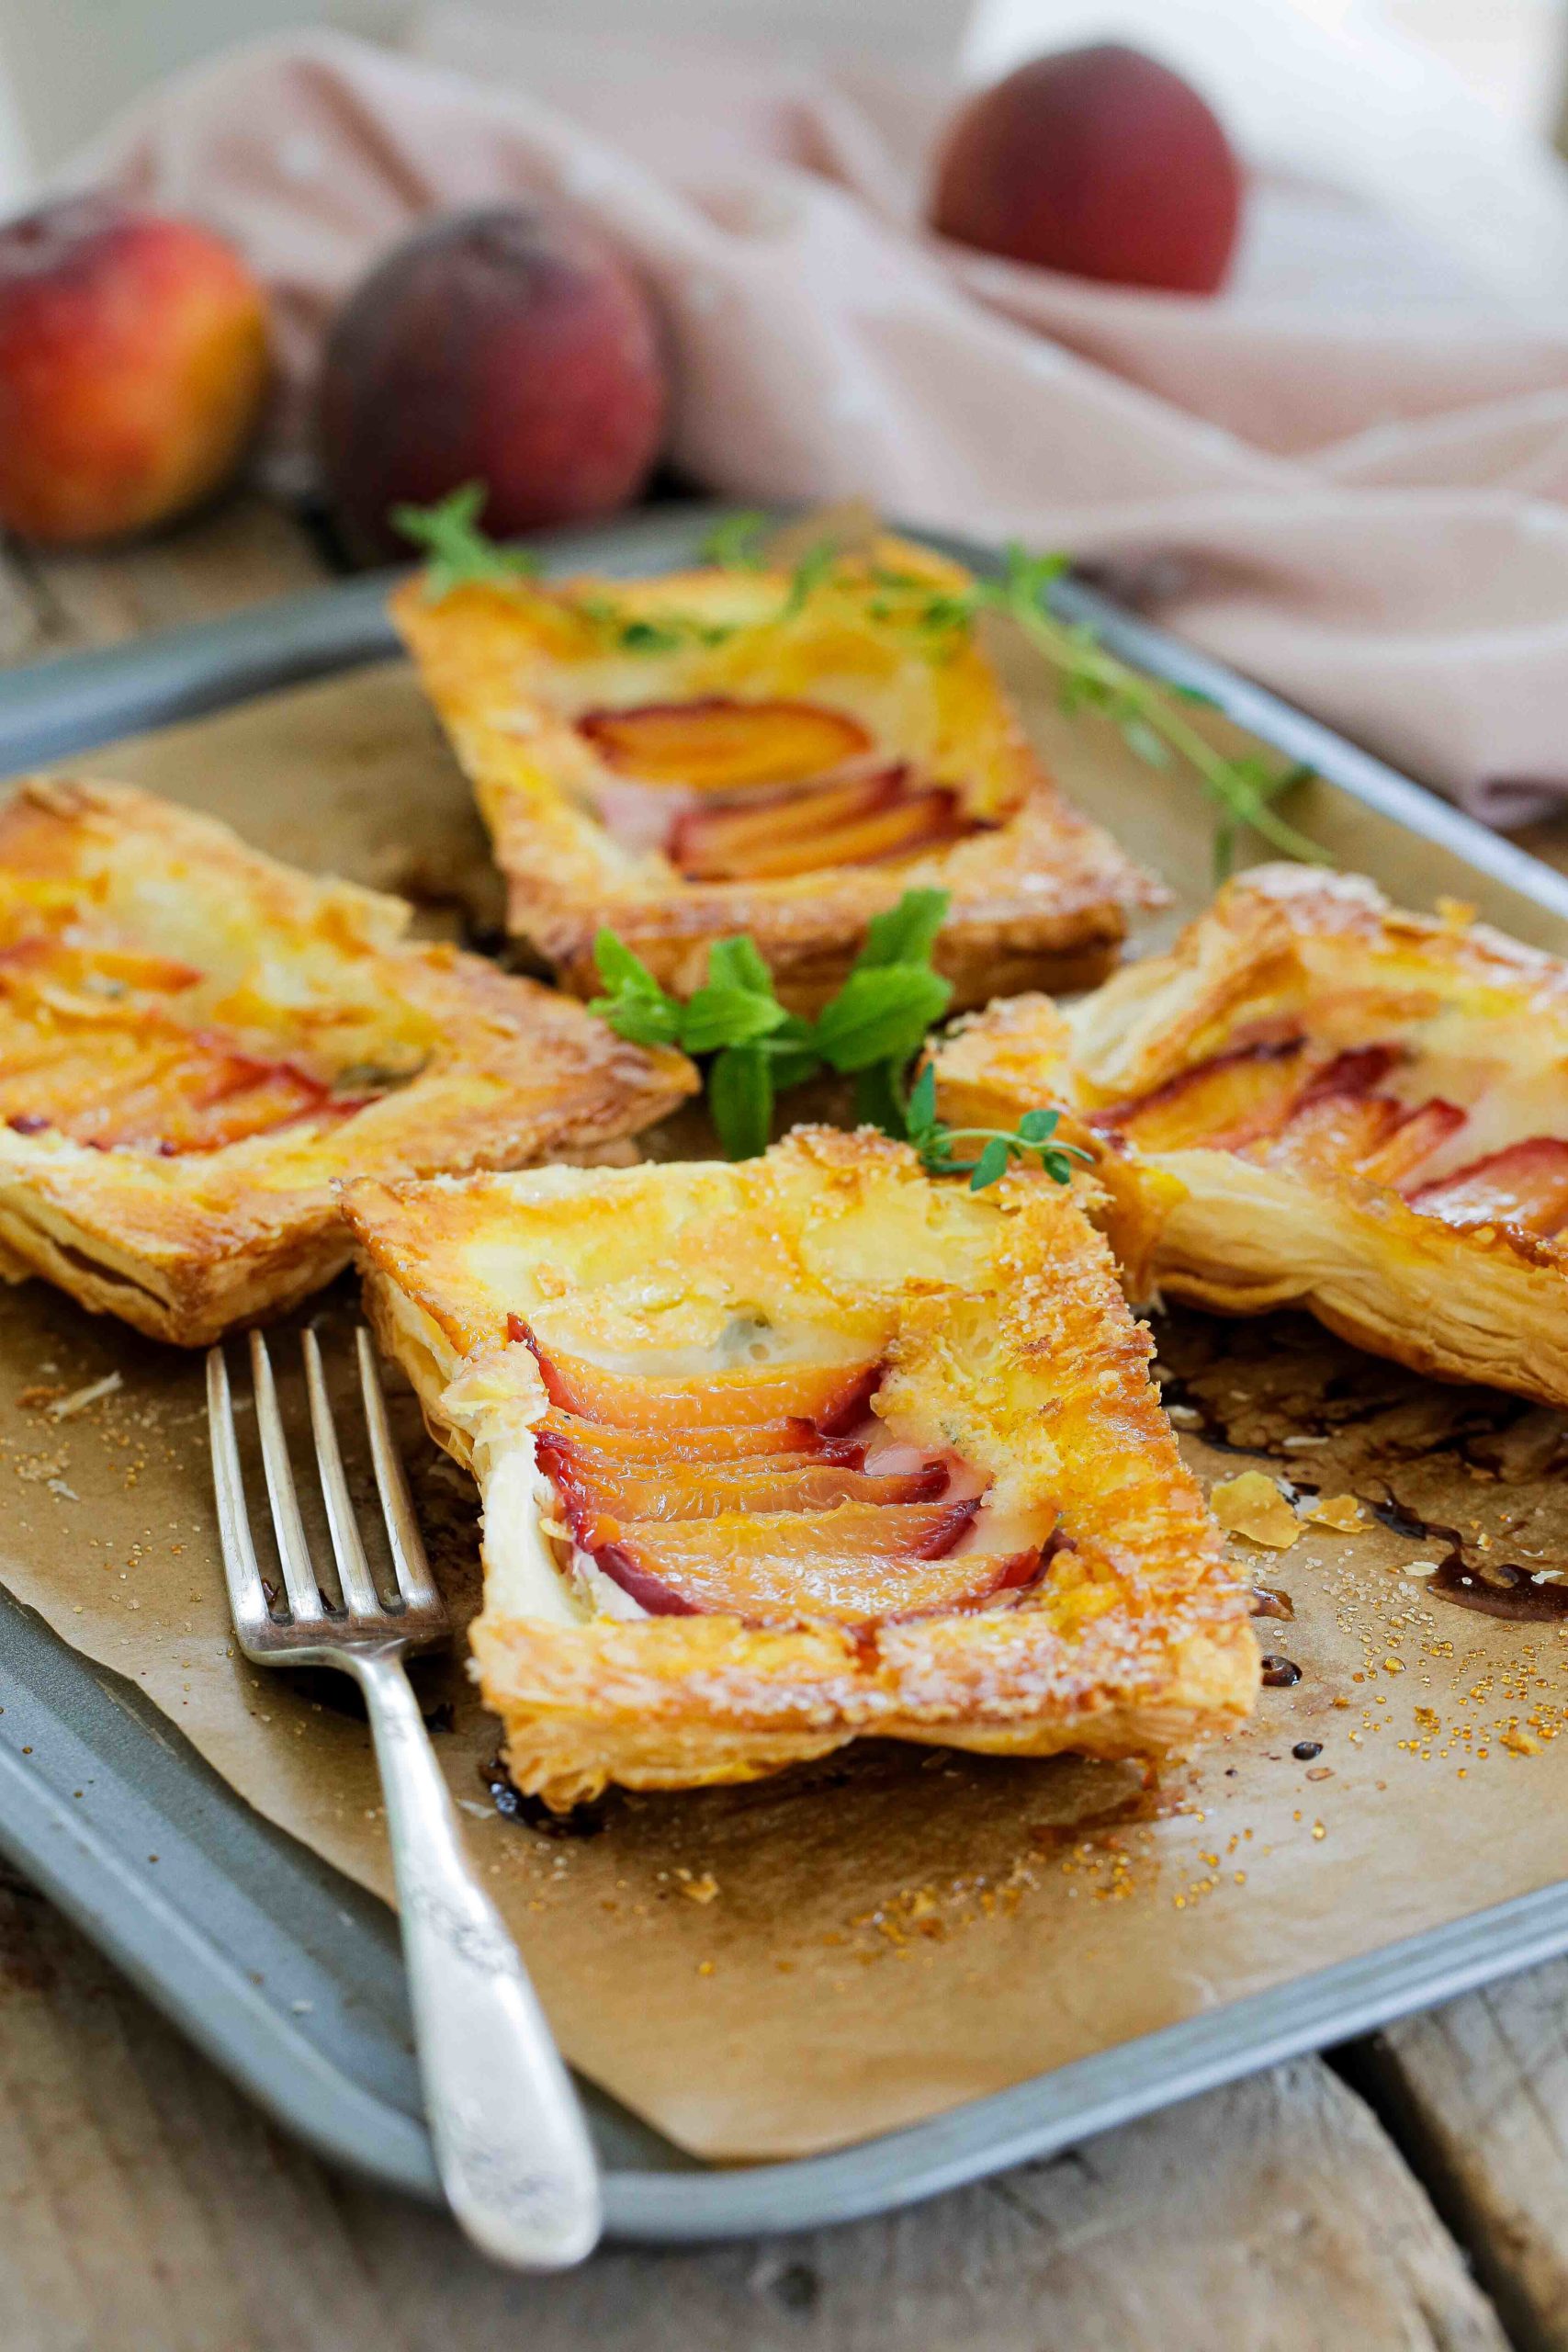 Delicious vegan desserts don't come any easier than these peach upside down tarts. The herb cream cheese adds even more garden fresh flavour! Recipe on thecookandhim.com | #vegandessertrecipes #veganpastries #upsidedowntarts #creamcheesetarts #puffpastry